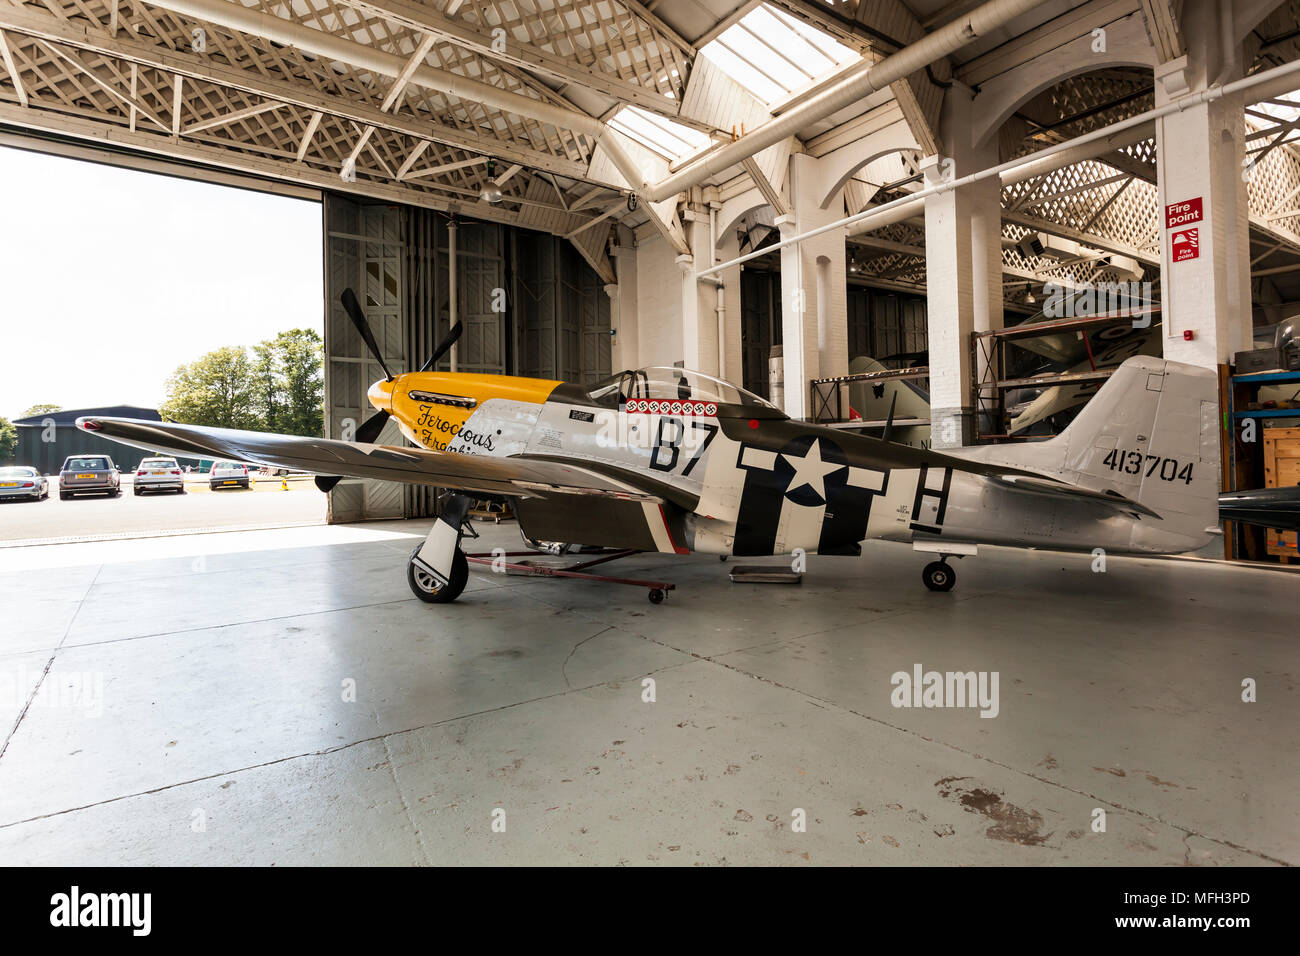 Duxford Air Museum. England, UK.  A P-51D Mustang on display in an aircraft hanger. Stock Photo